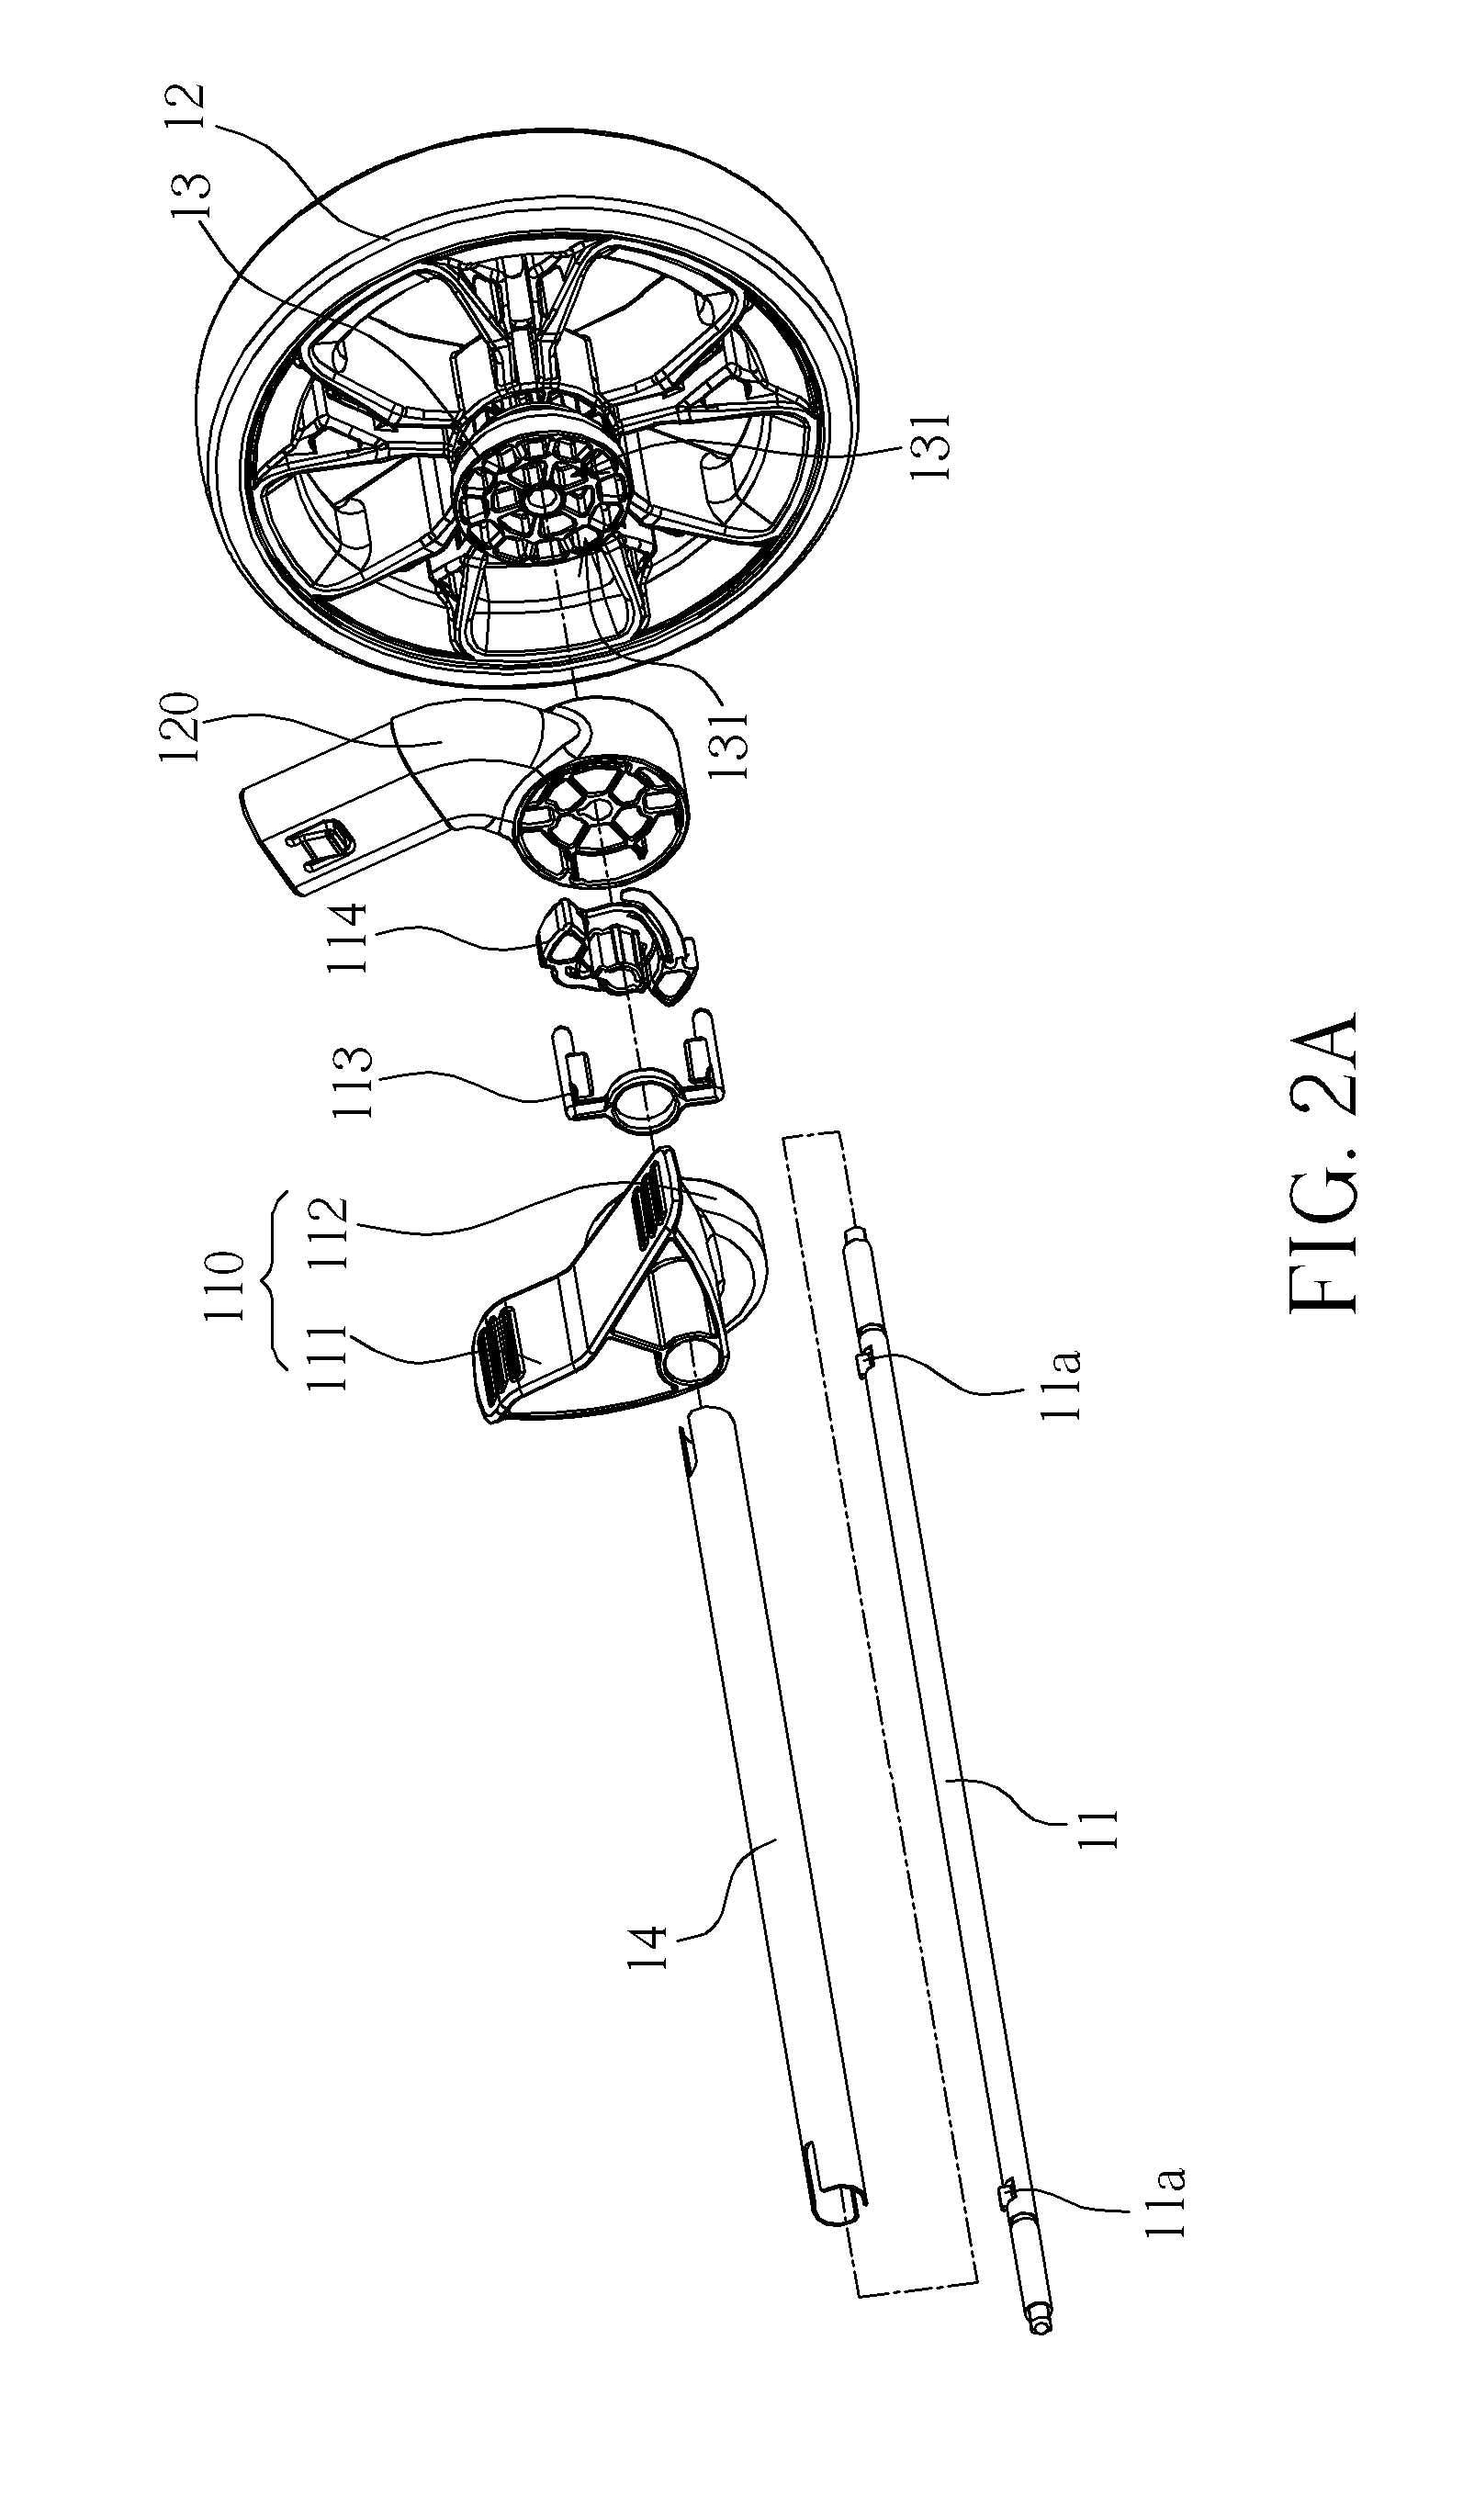 Stroller and brake mechanism thereof